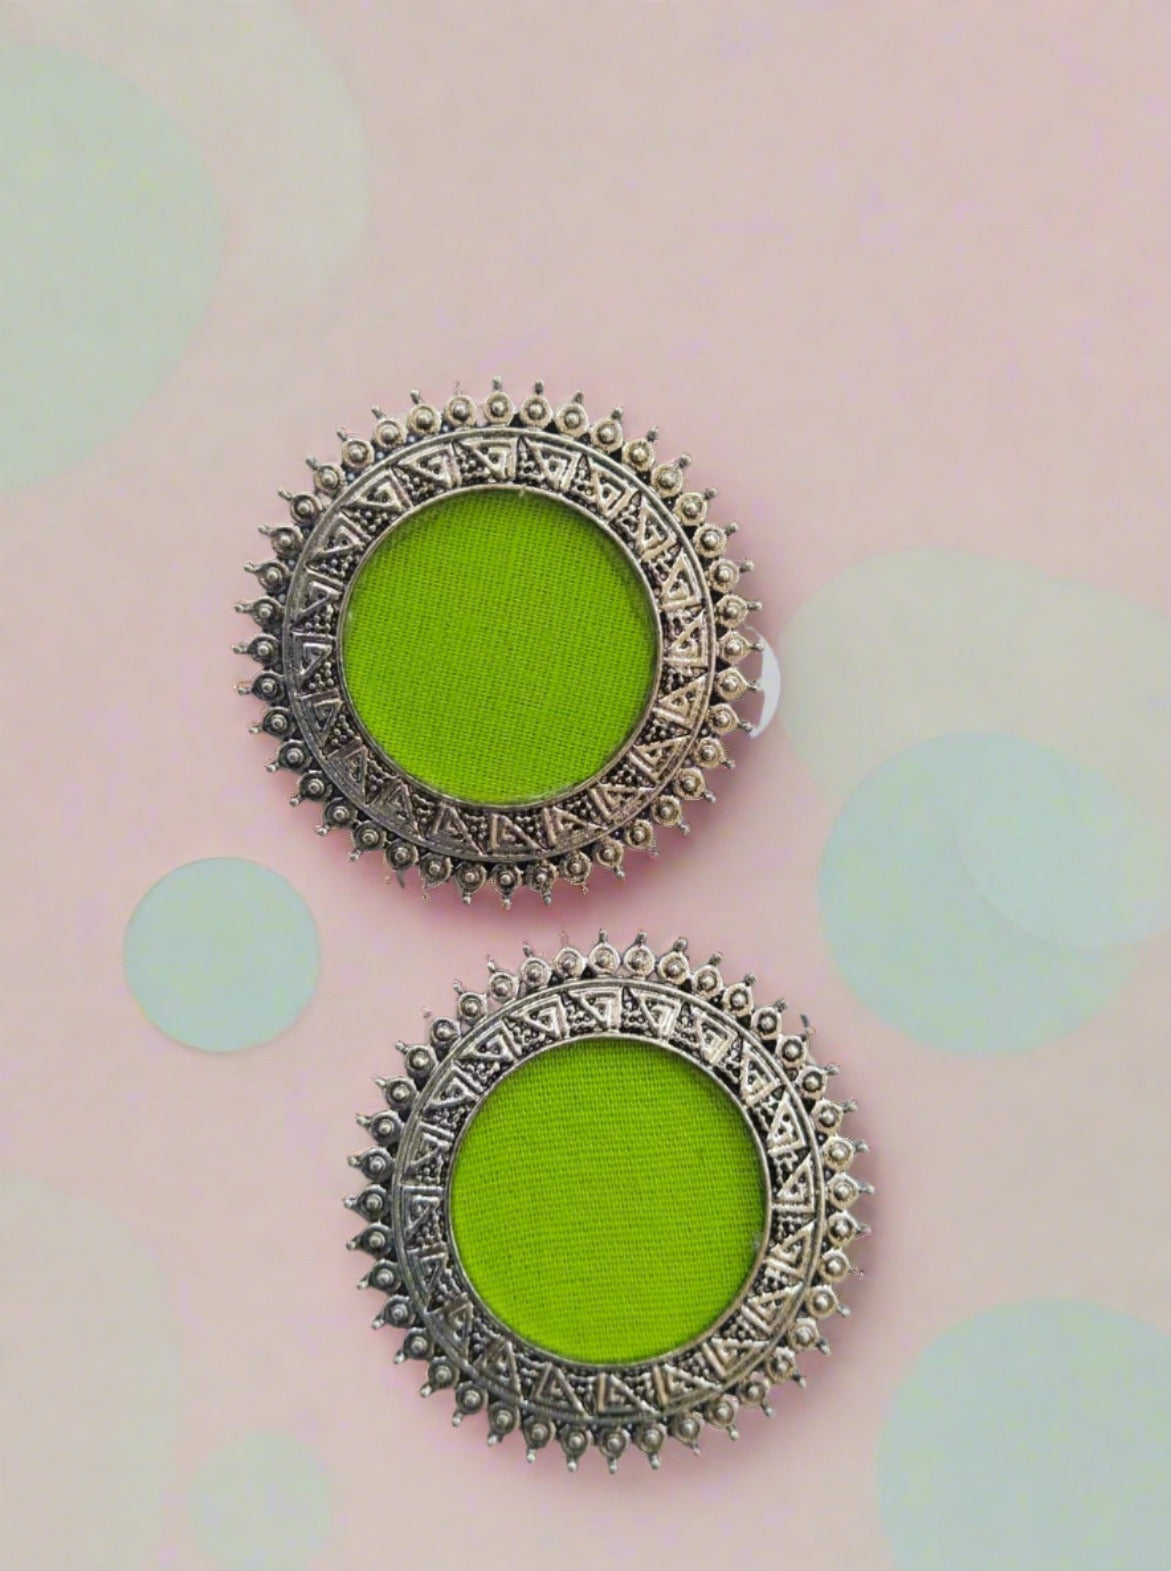 Lime green round studs earrings with silver chain border on white backdrop